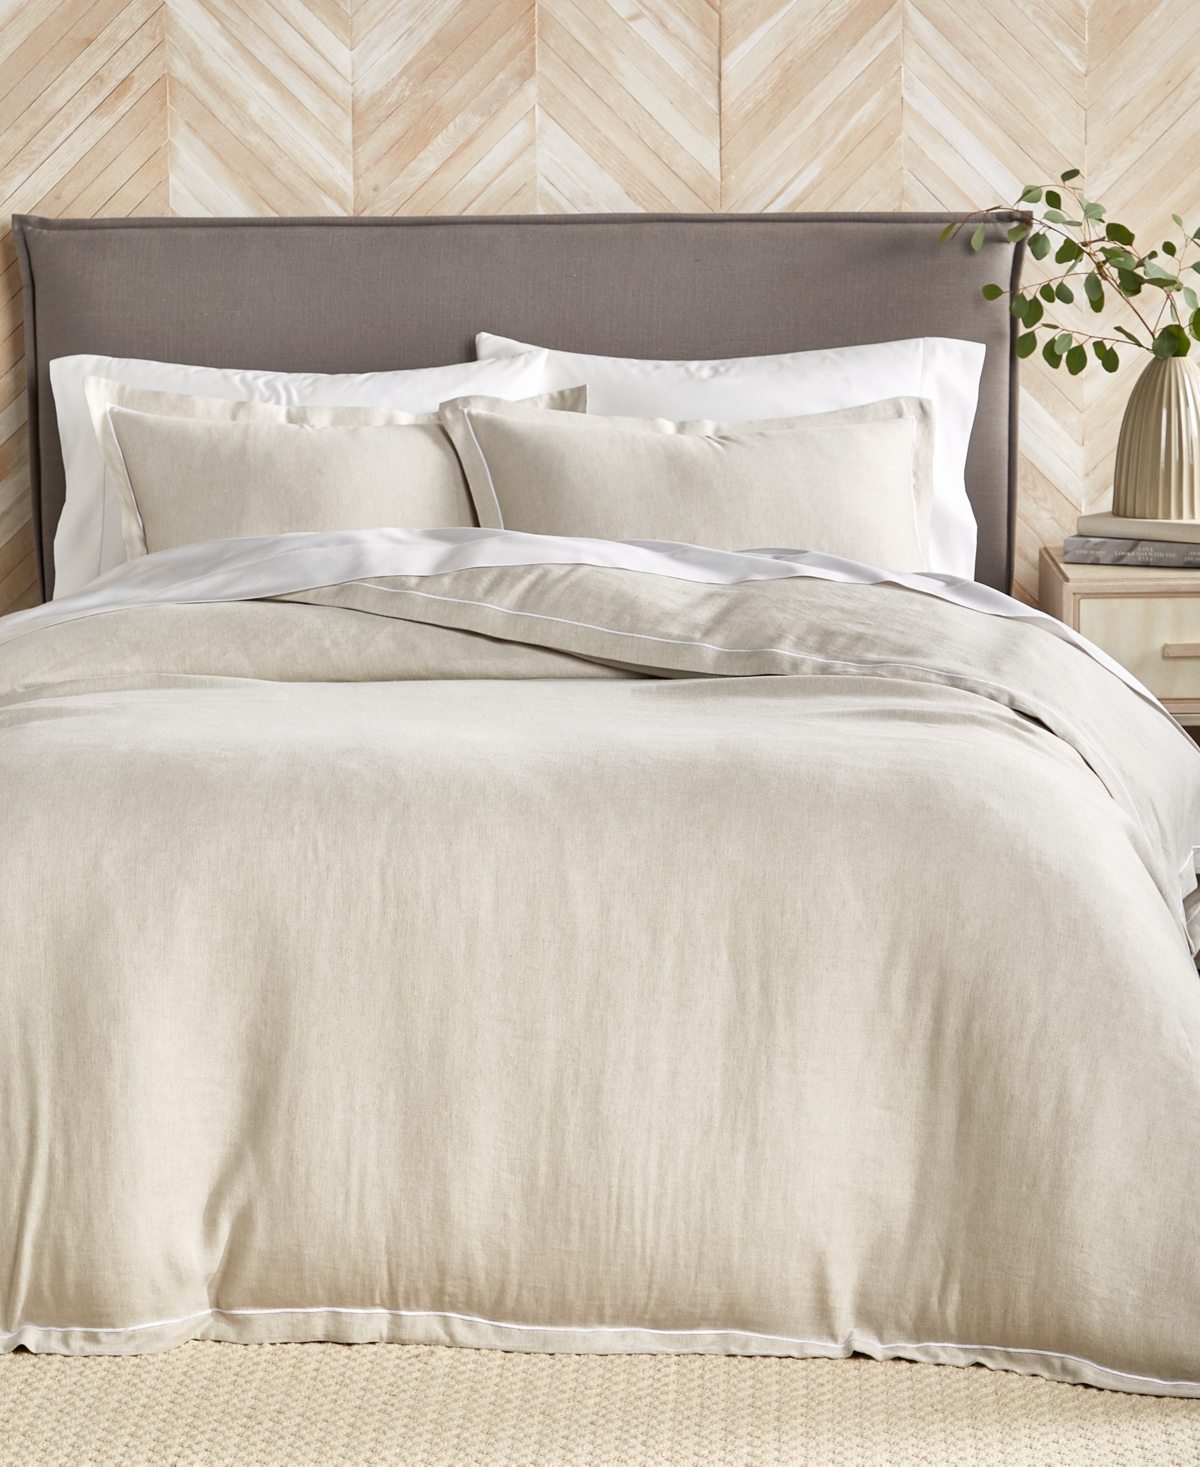 Hotel Collection Linen/modal Blend 3-pc. Duvet Cover Set, Full/queen, Created For Macy's In Natural